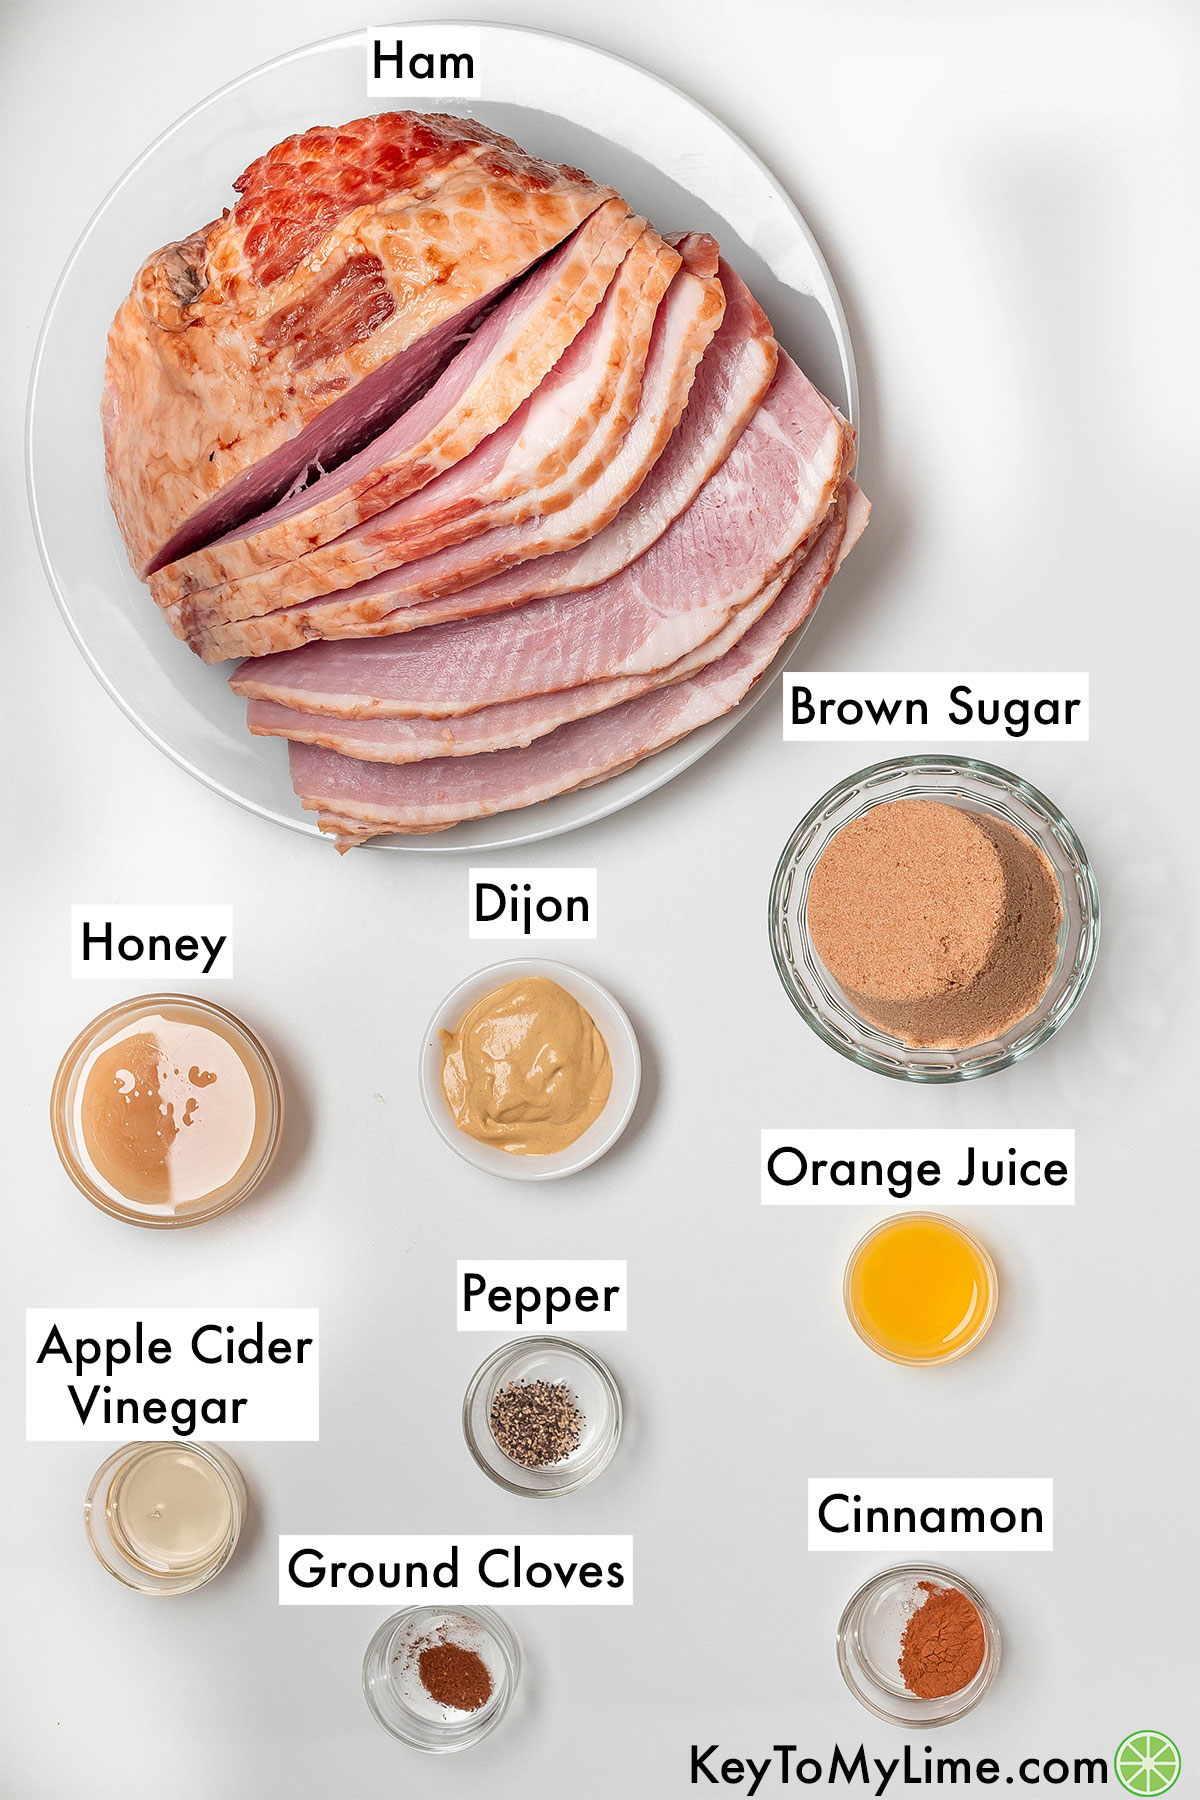 The labeled ingredients for air fryer ham.